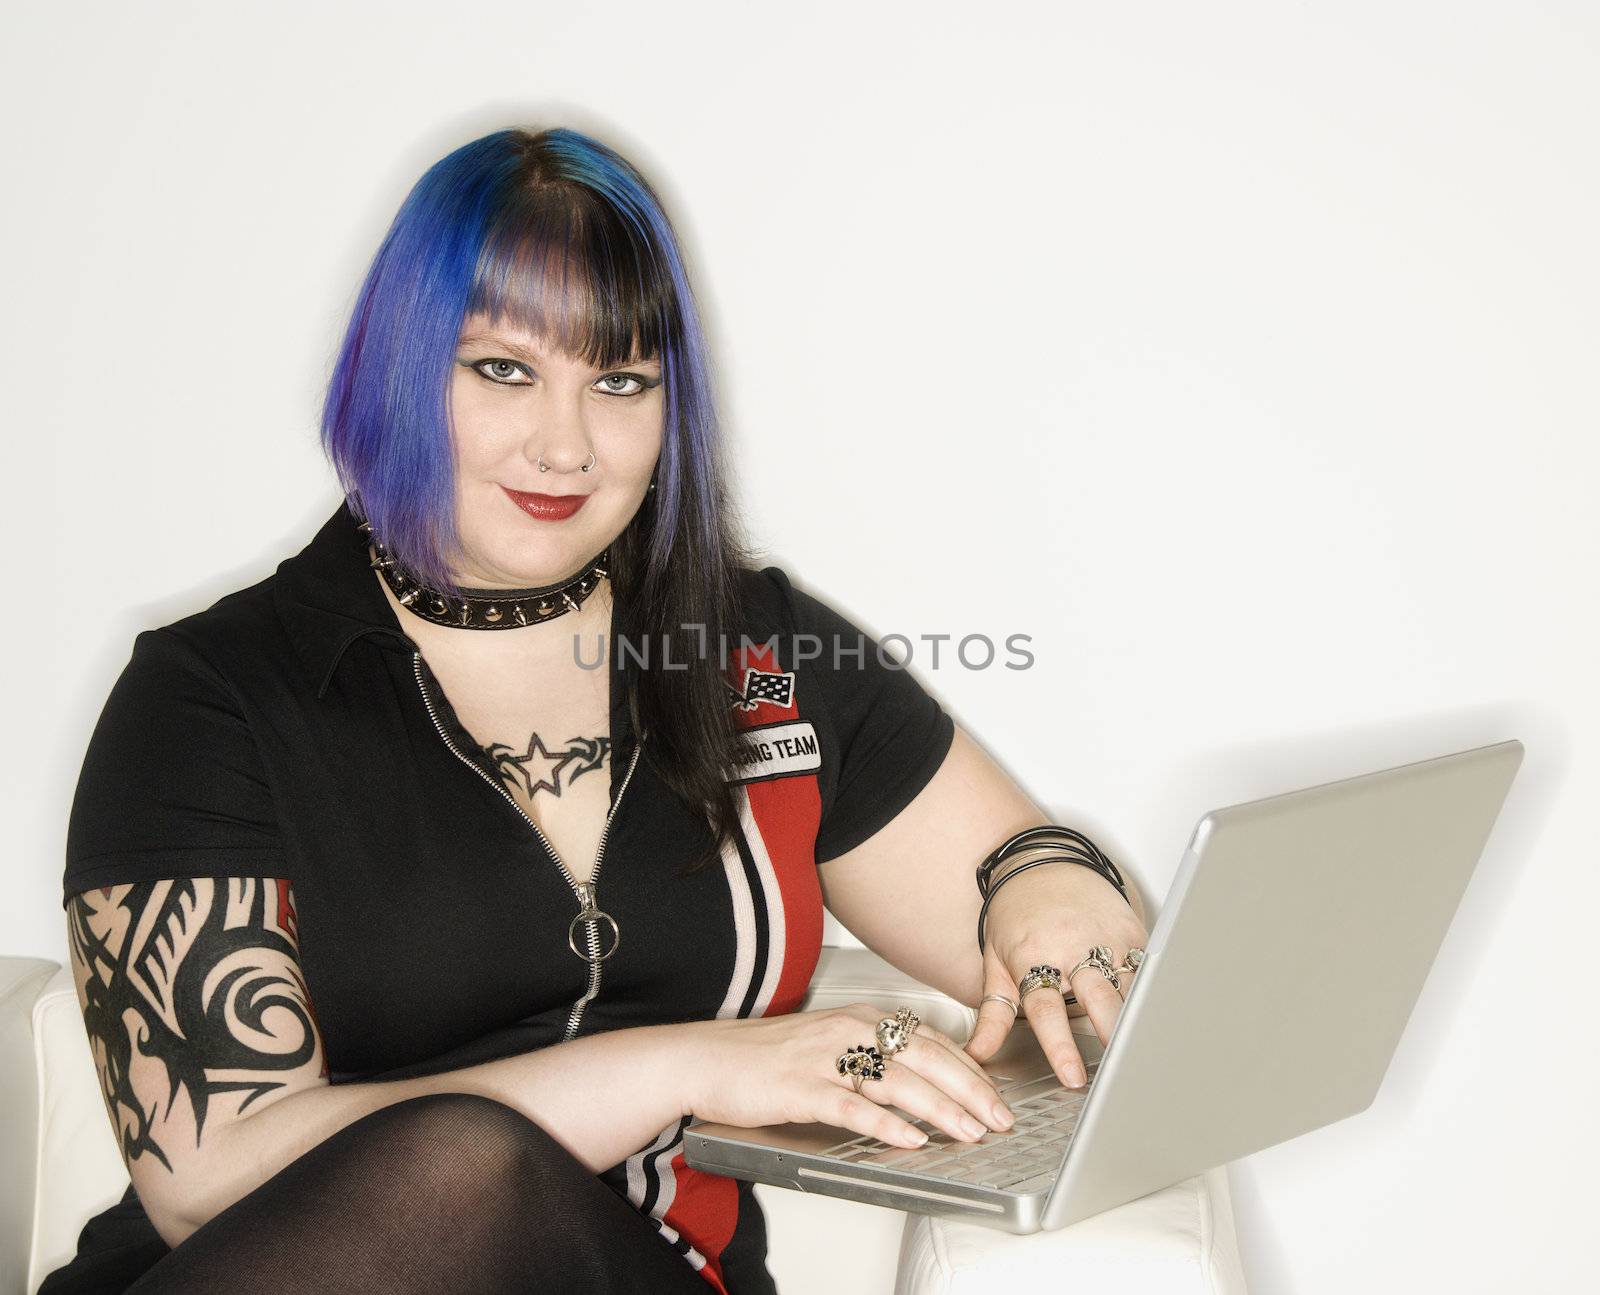 Portrait of Caucasian woman with blue hair, tattoo, and spike collar typing on laptop against white background.